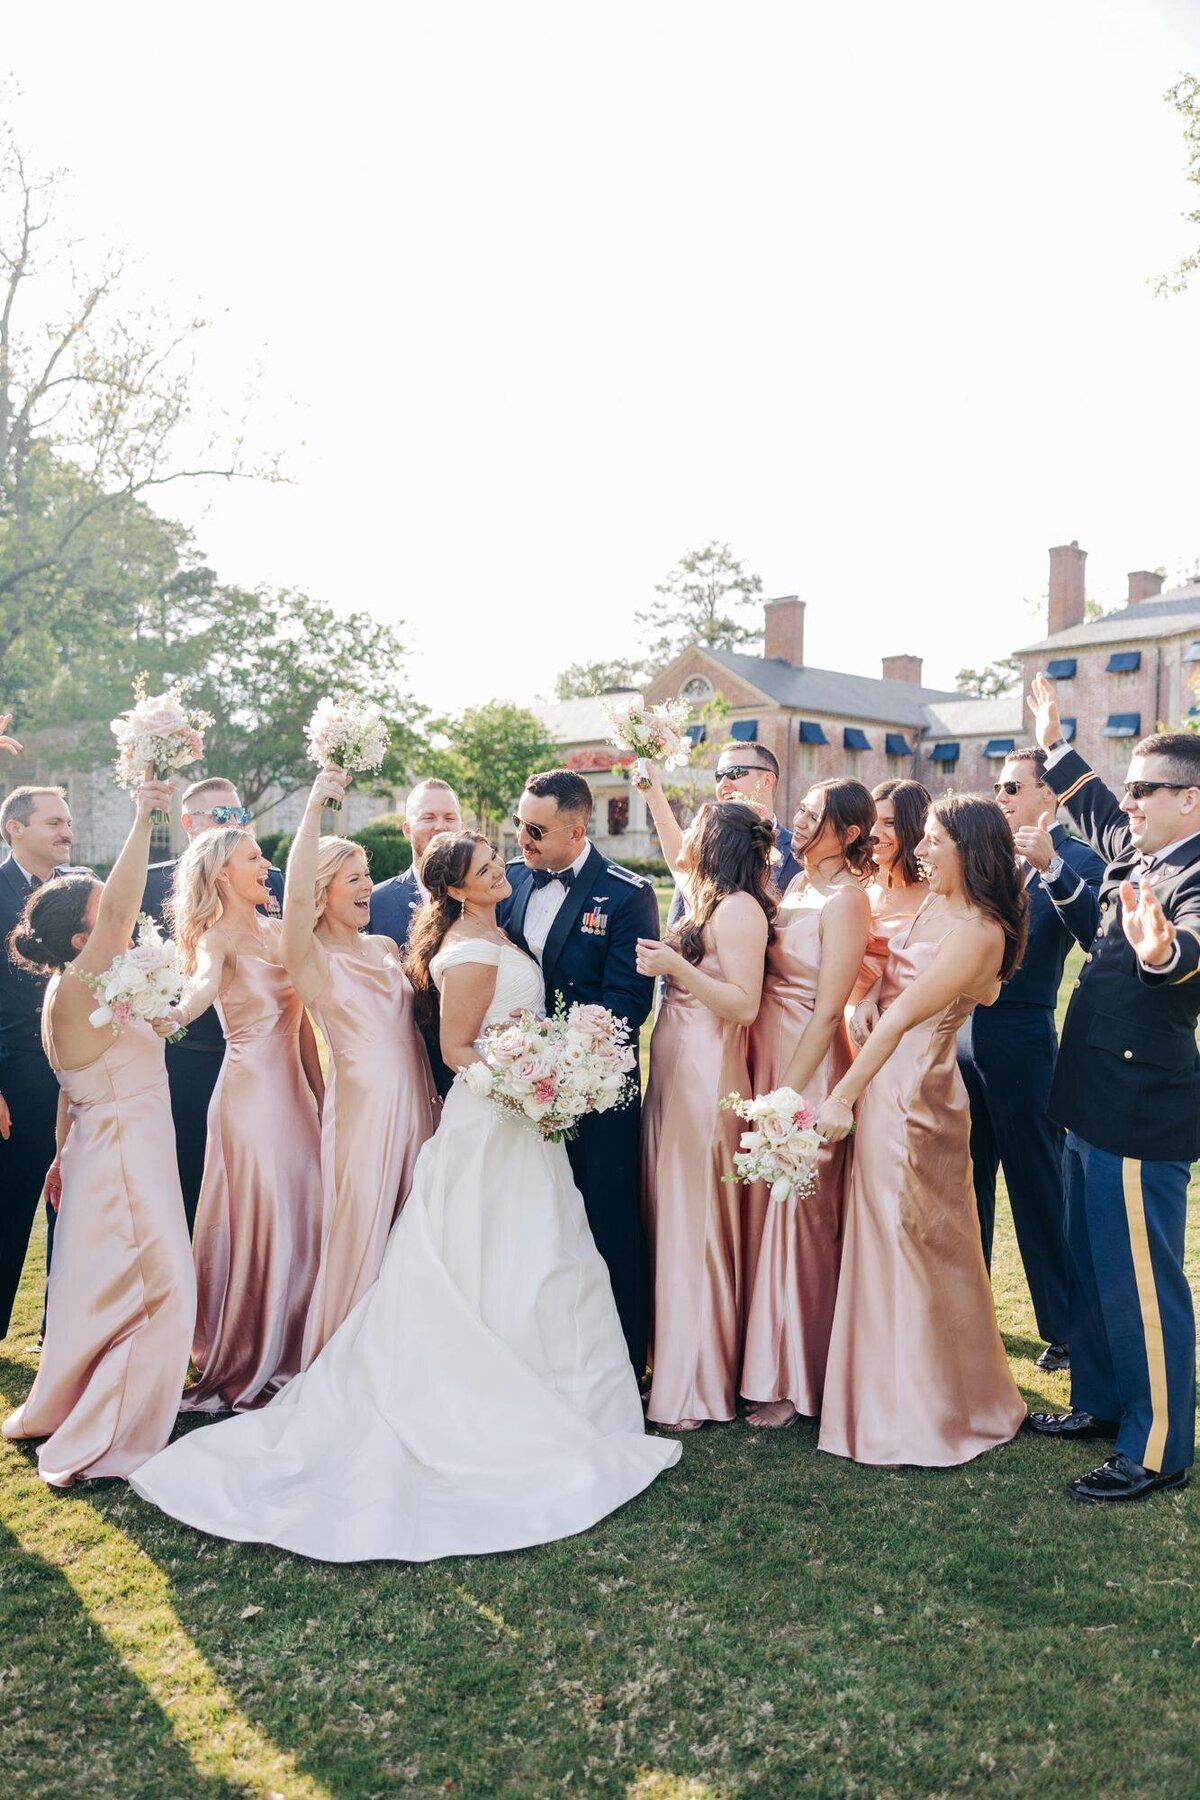 A wedding celebration outdoors with a joyful bridal party surrounding the bride and groom.